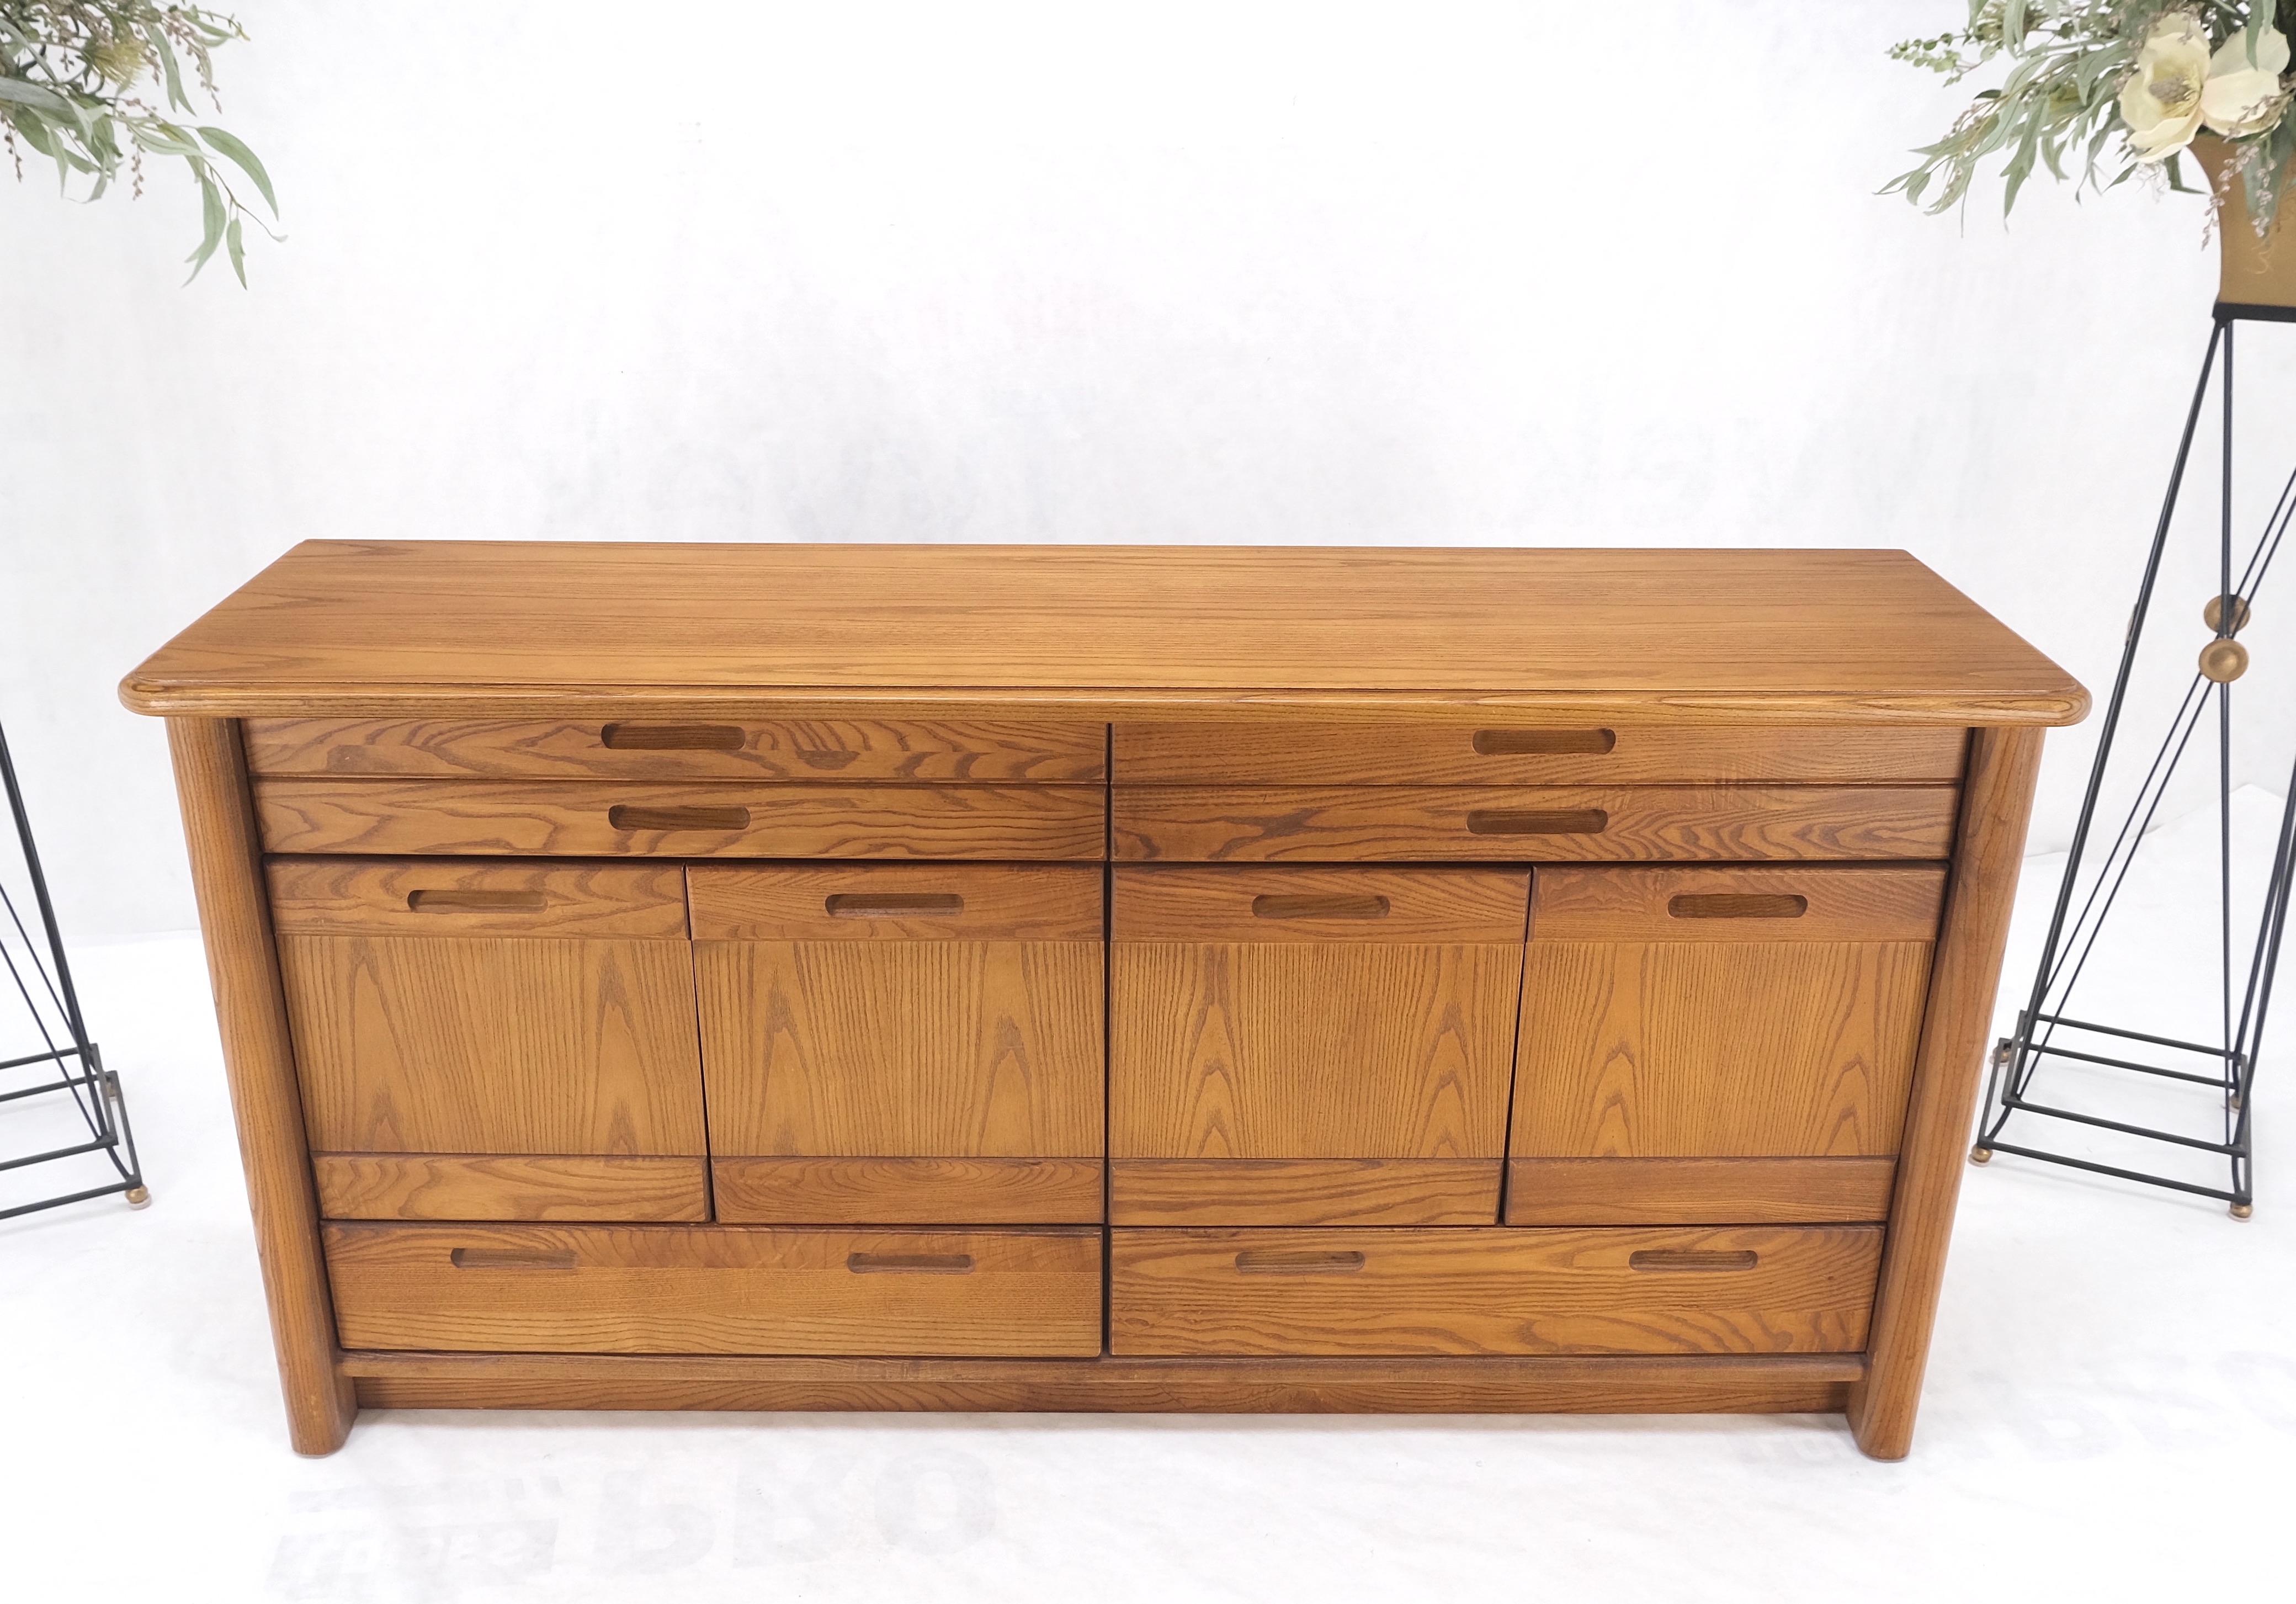 Solid Oak Mid-Century Modern Credenza Server Two Door Compartments Cabinet MINT!